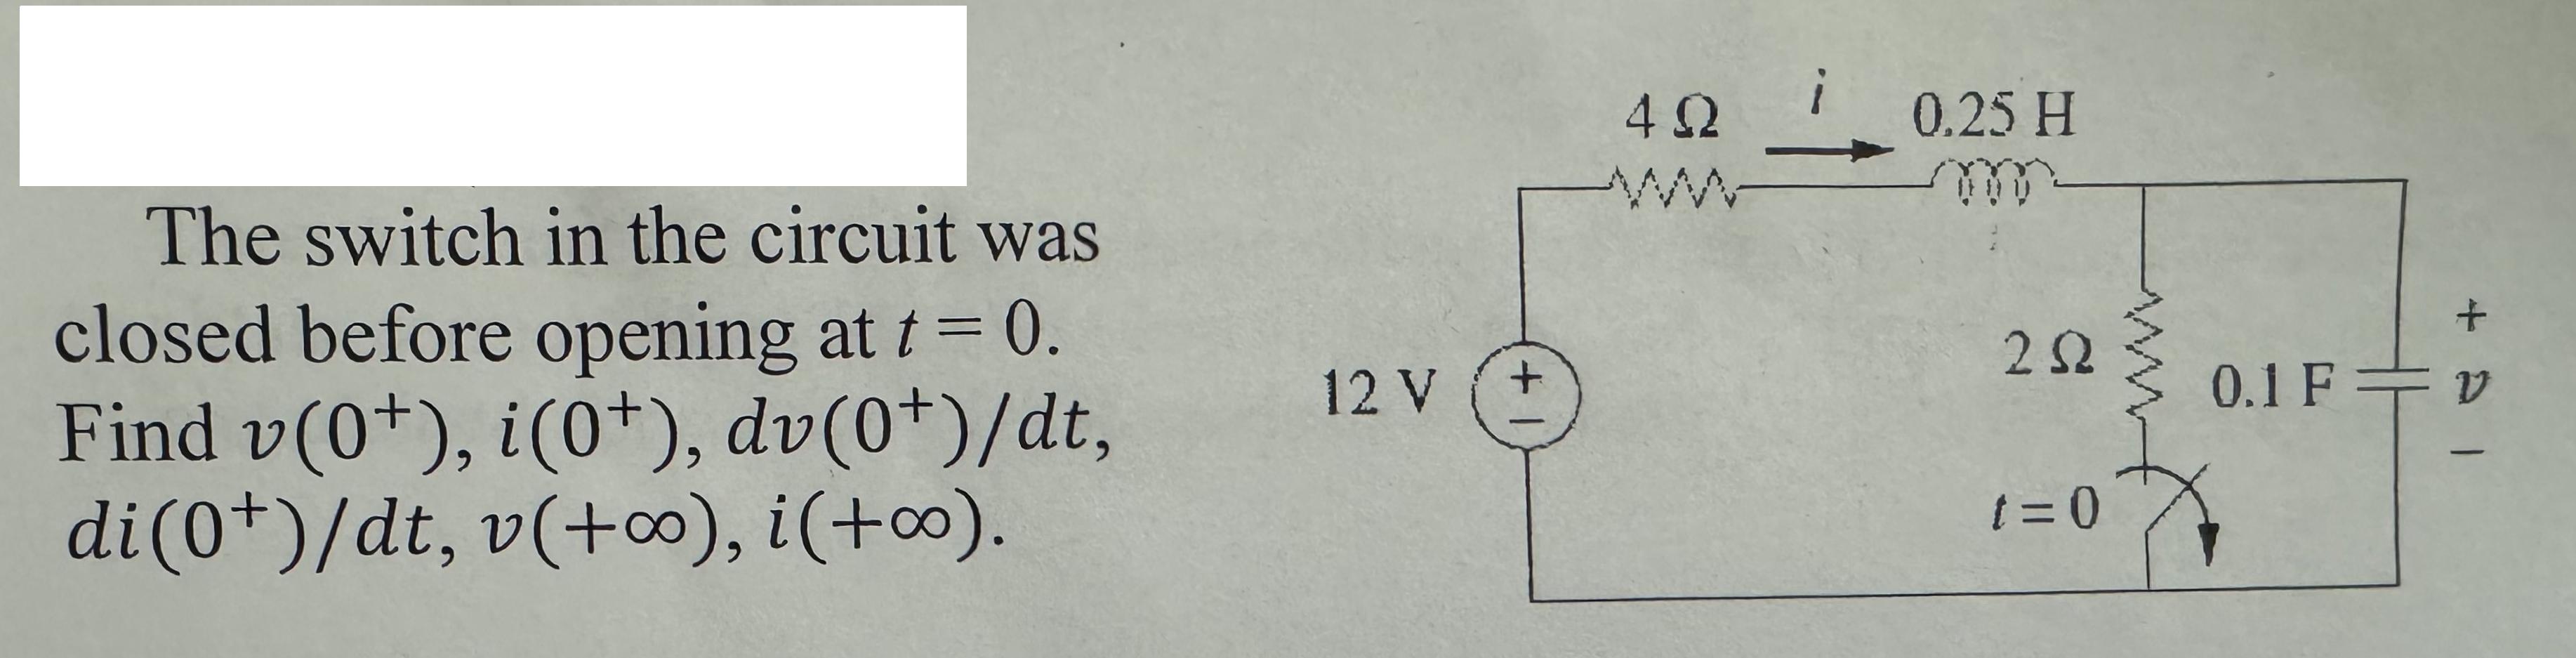 The switch in the circuit was closed before opening at t = 0. Find v(0+), i(0), dv(0+)/dt, di (0+)/dt, v(+),